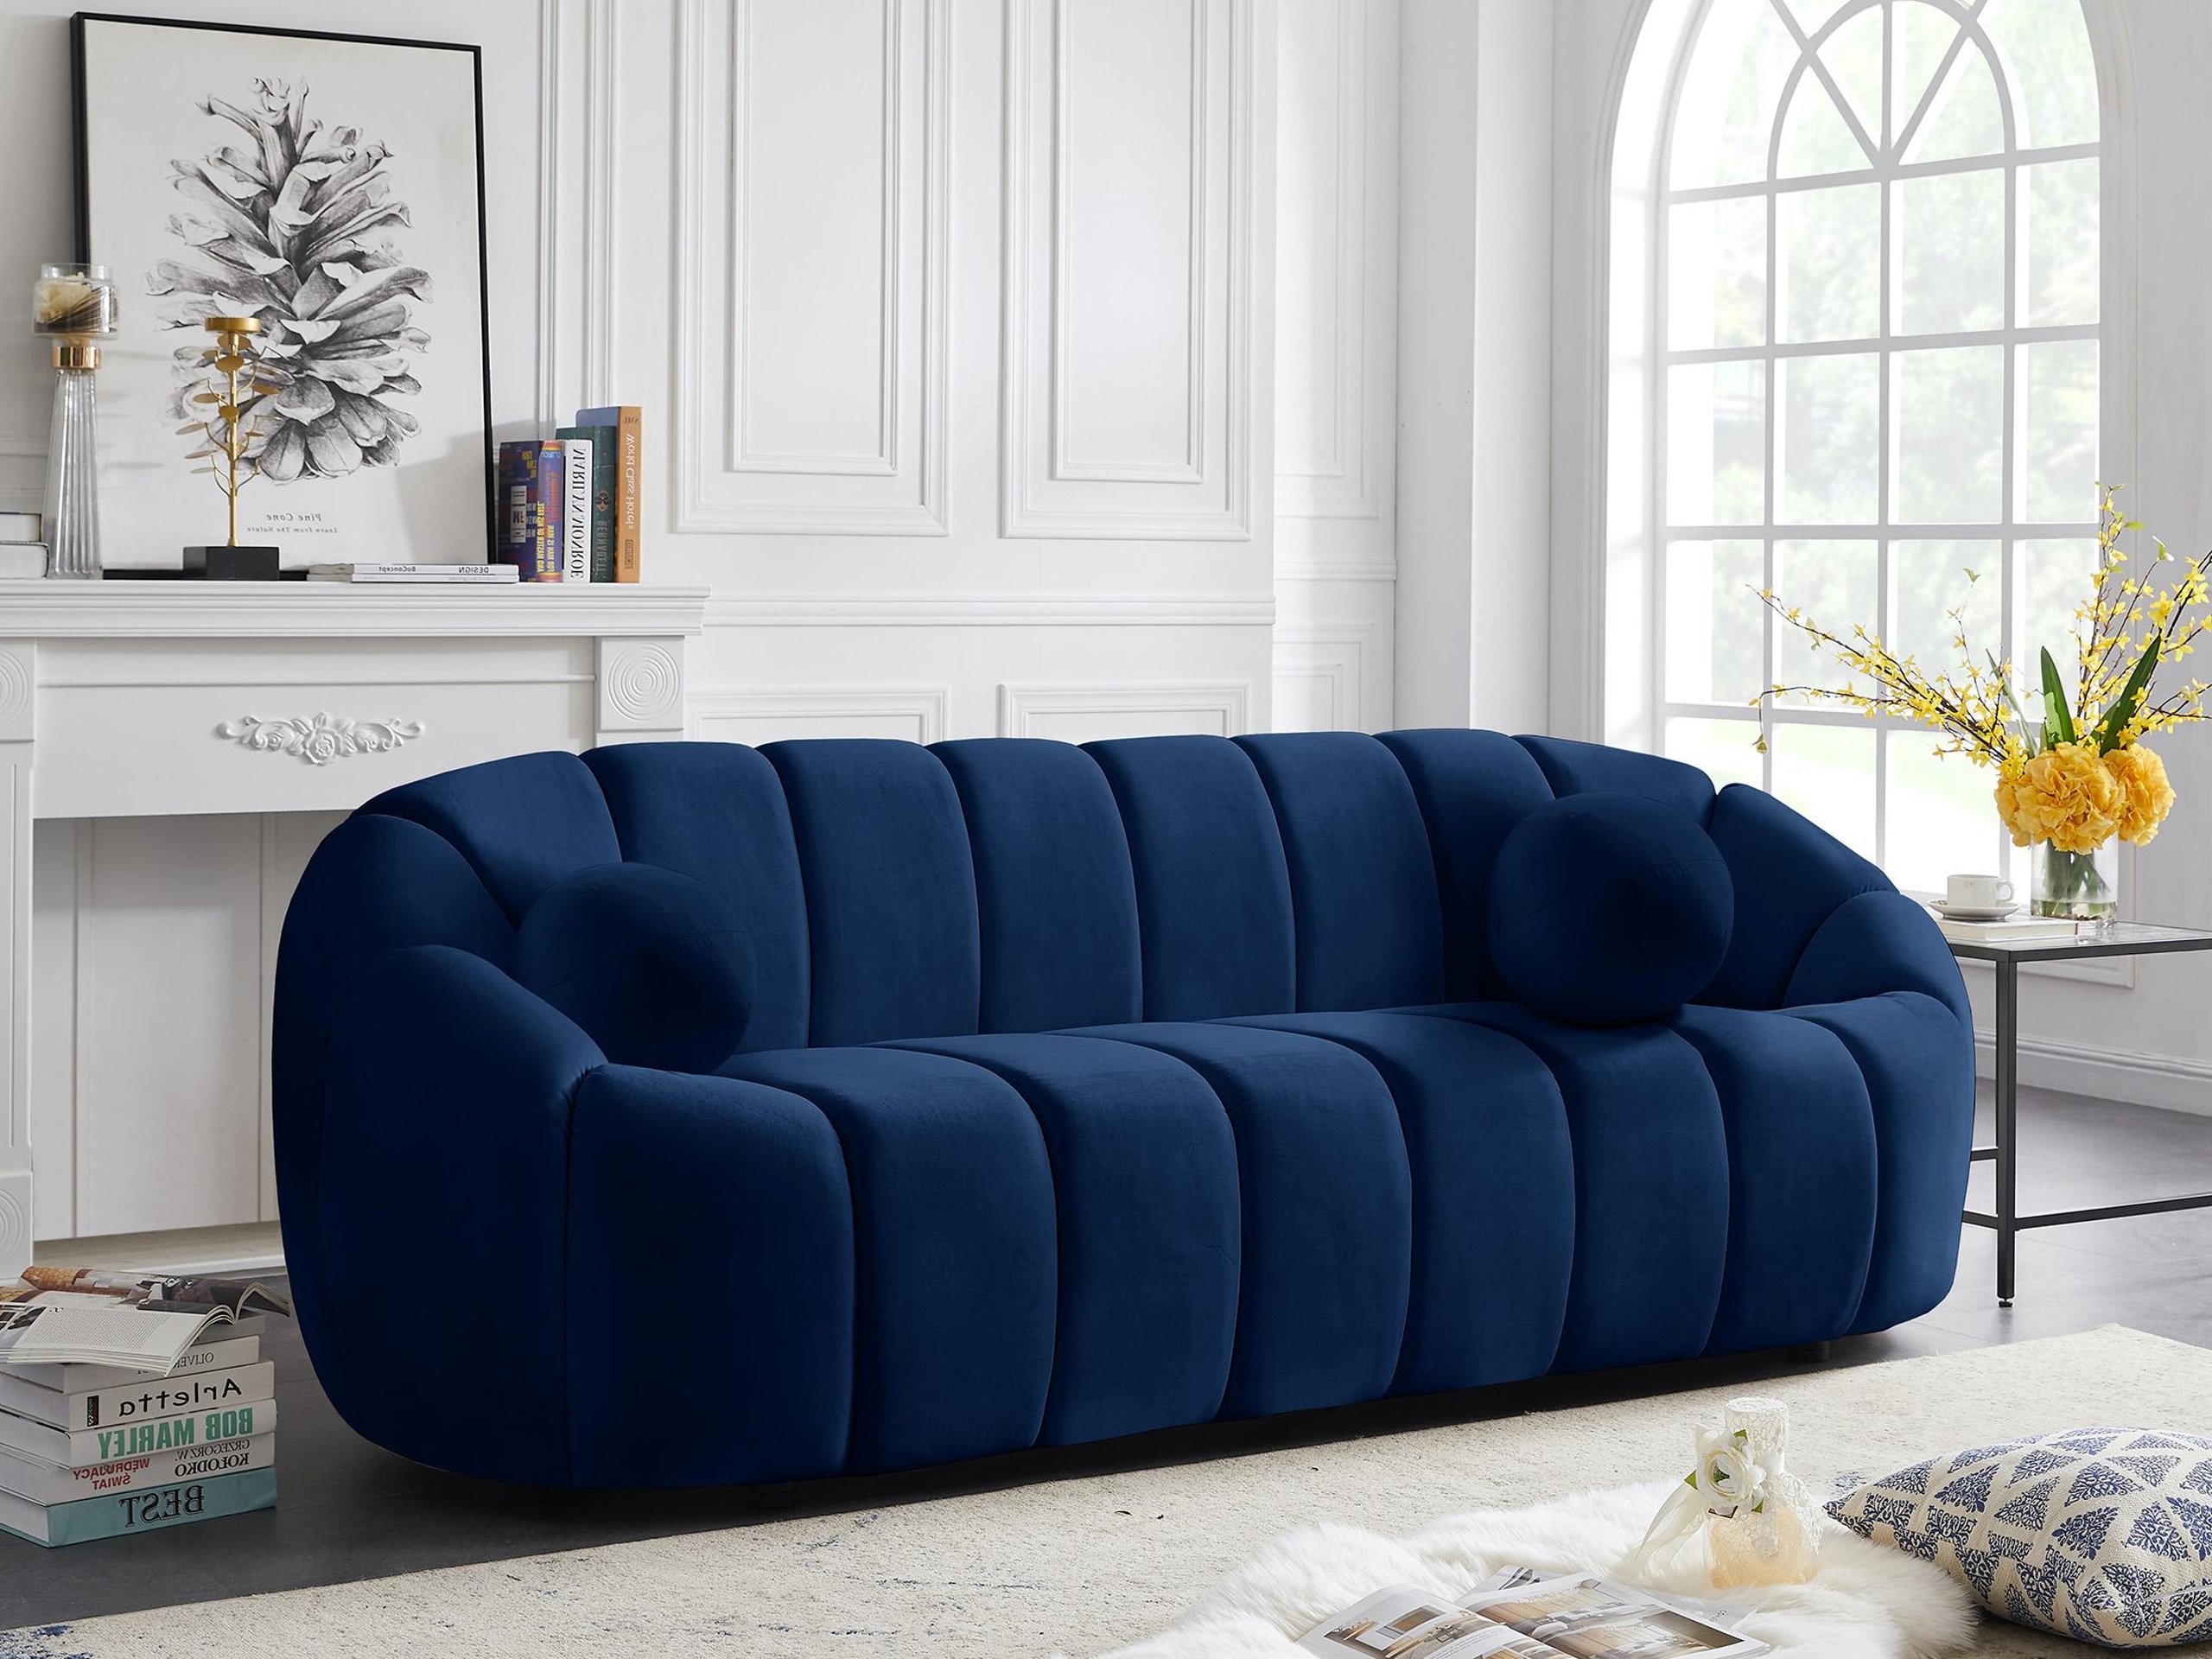 Glam NAVY Velvet Channel Tufted Sofa Set 3P ELIJAH 613Navy Meridian Contemporary – buy online on NY Outlet